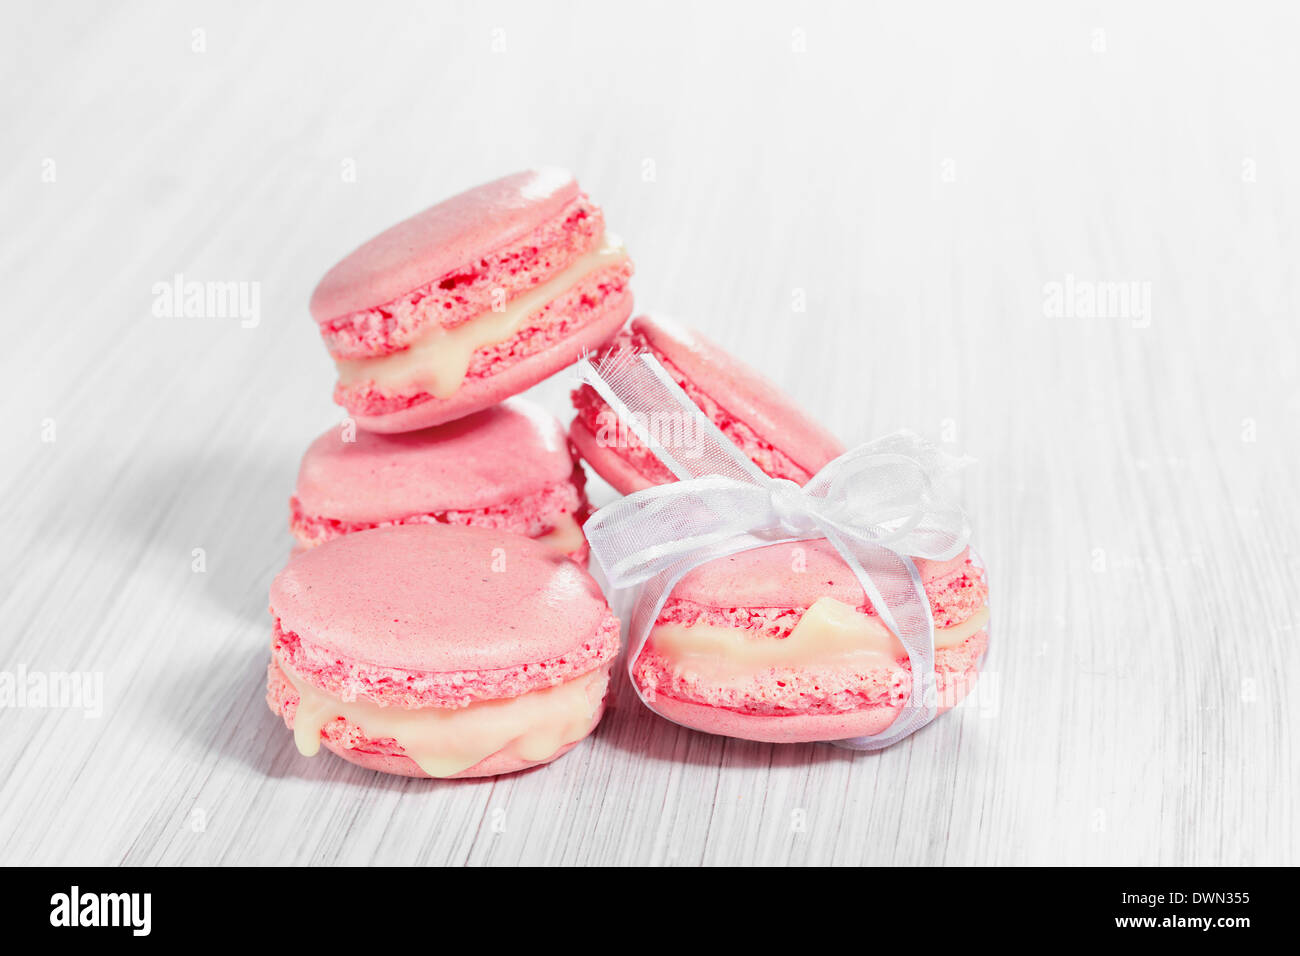 Pink French macarons on a wooden background. Stock Photo